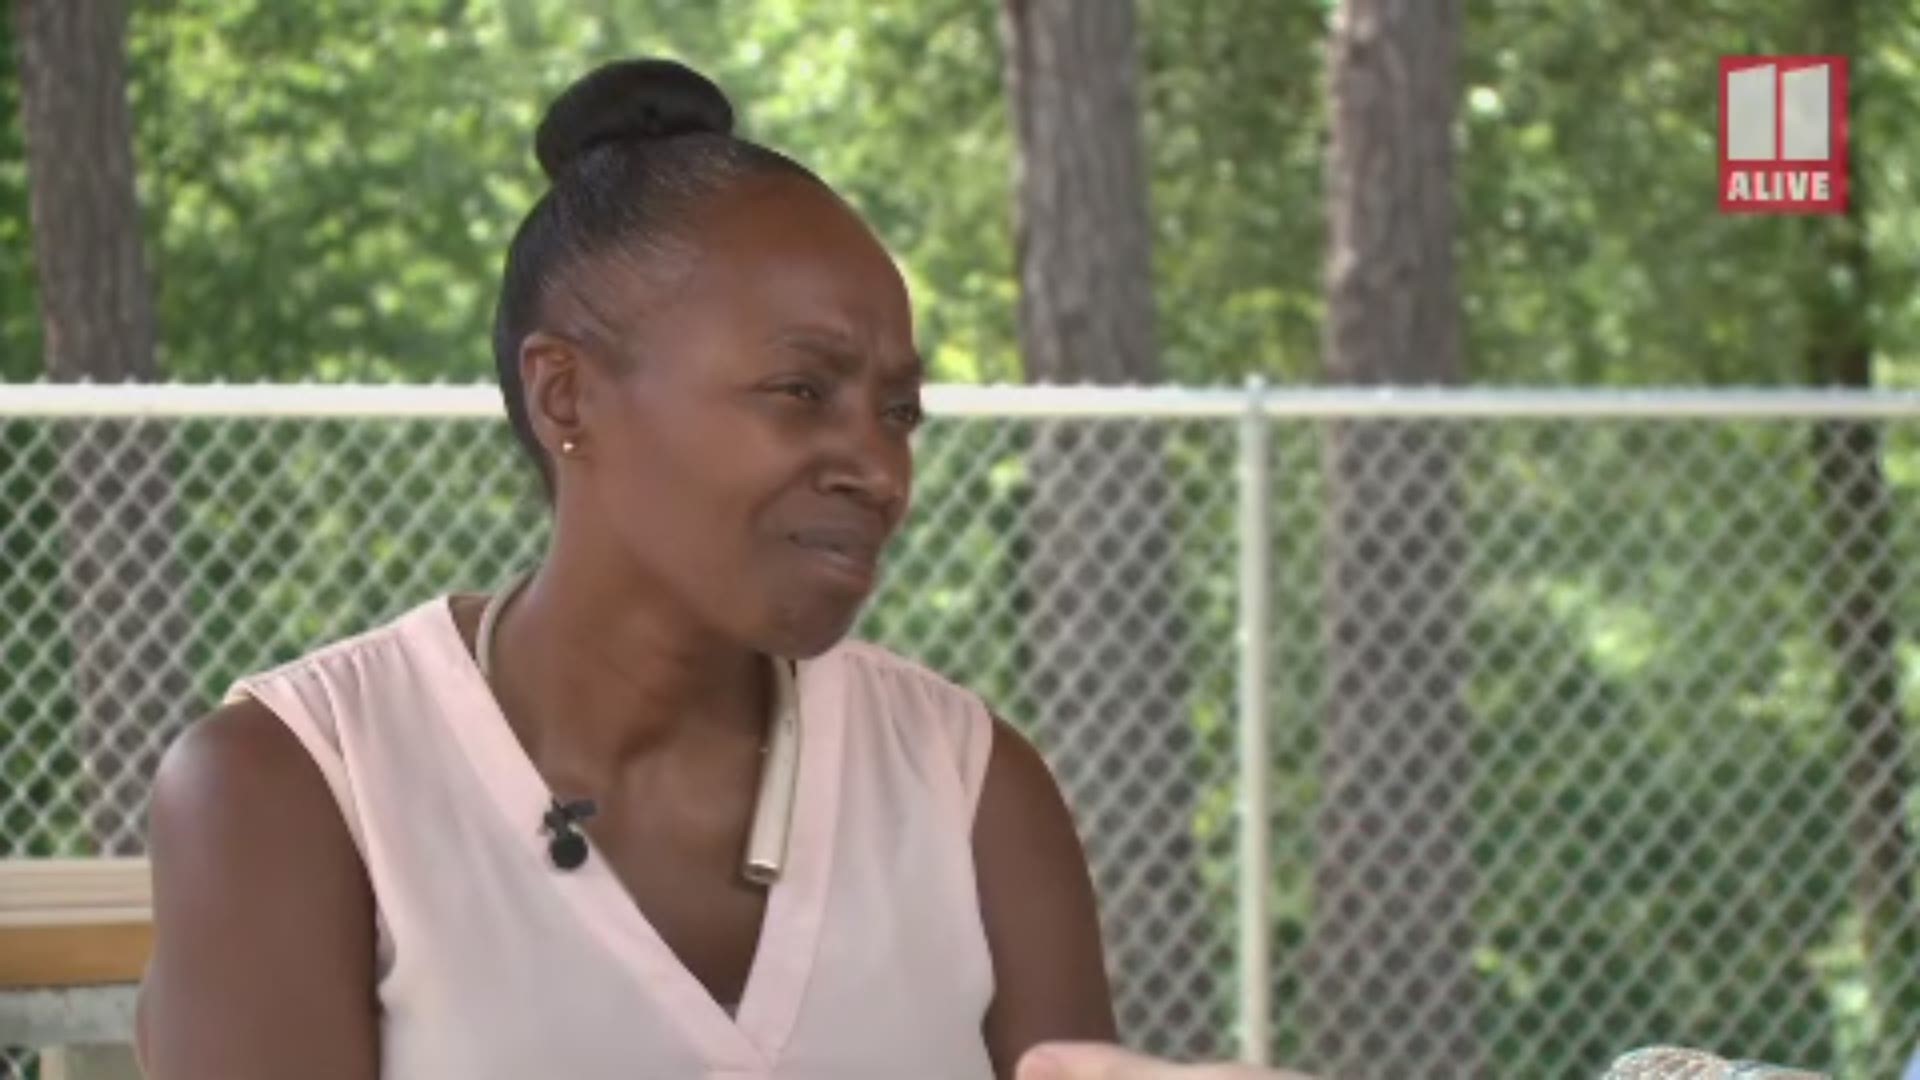 Robin Moss, the grandmother of Emani Moss, said she wishes that her daughter-in-law Tiffany Moss got life in prison instead of the death penalty for starving the 10-year-old girl and burning her body in a trashcan at her Gwinnett County home.